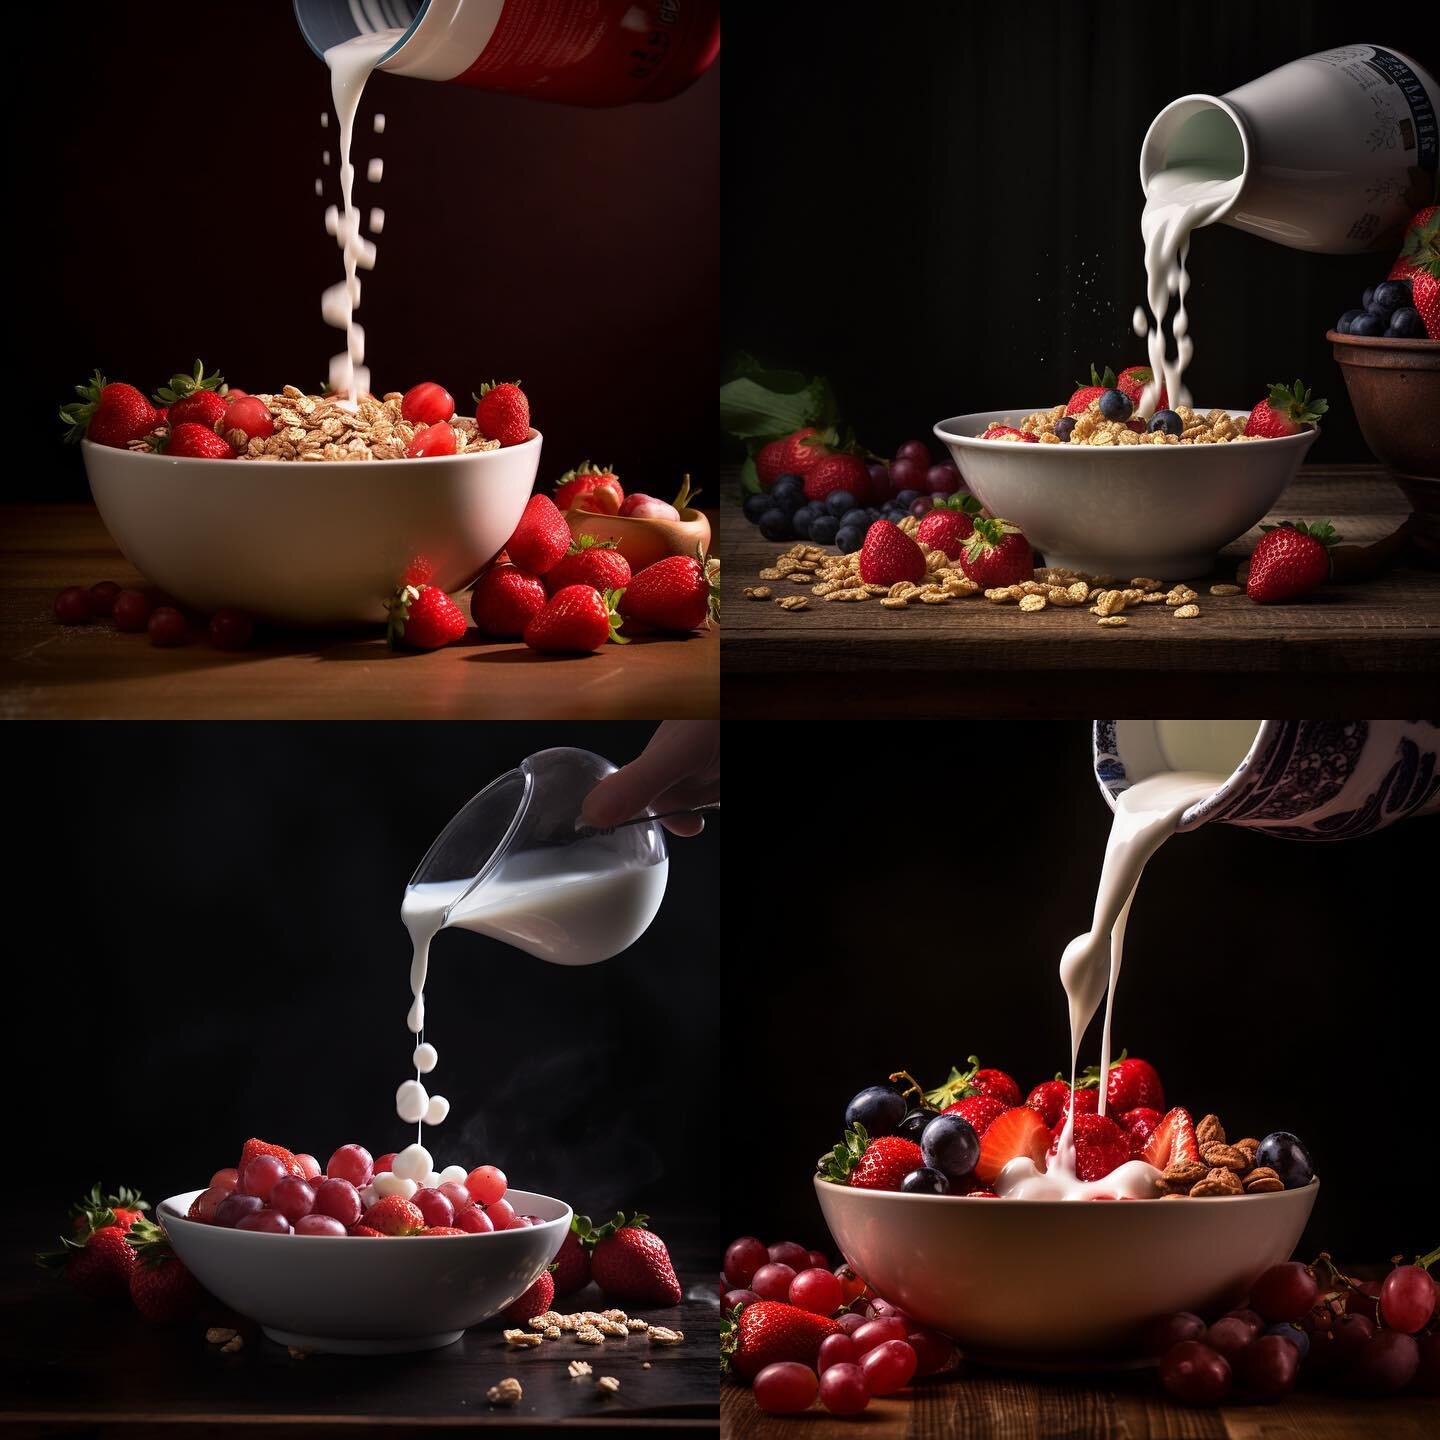 Testing prompts for food photography on MidJourney. Still have to figure out how to get the milk to look right. 

#midjourney #ai #midjourneyart